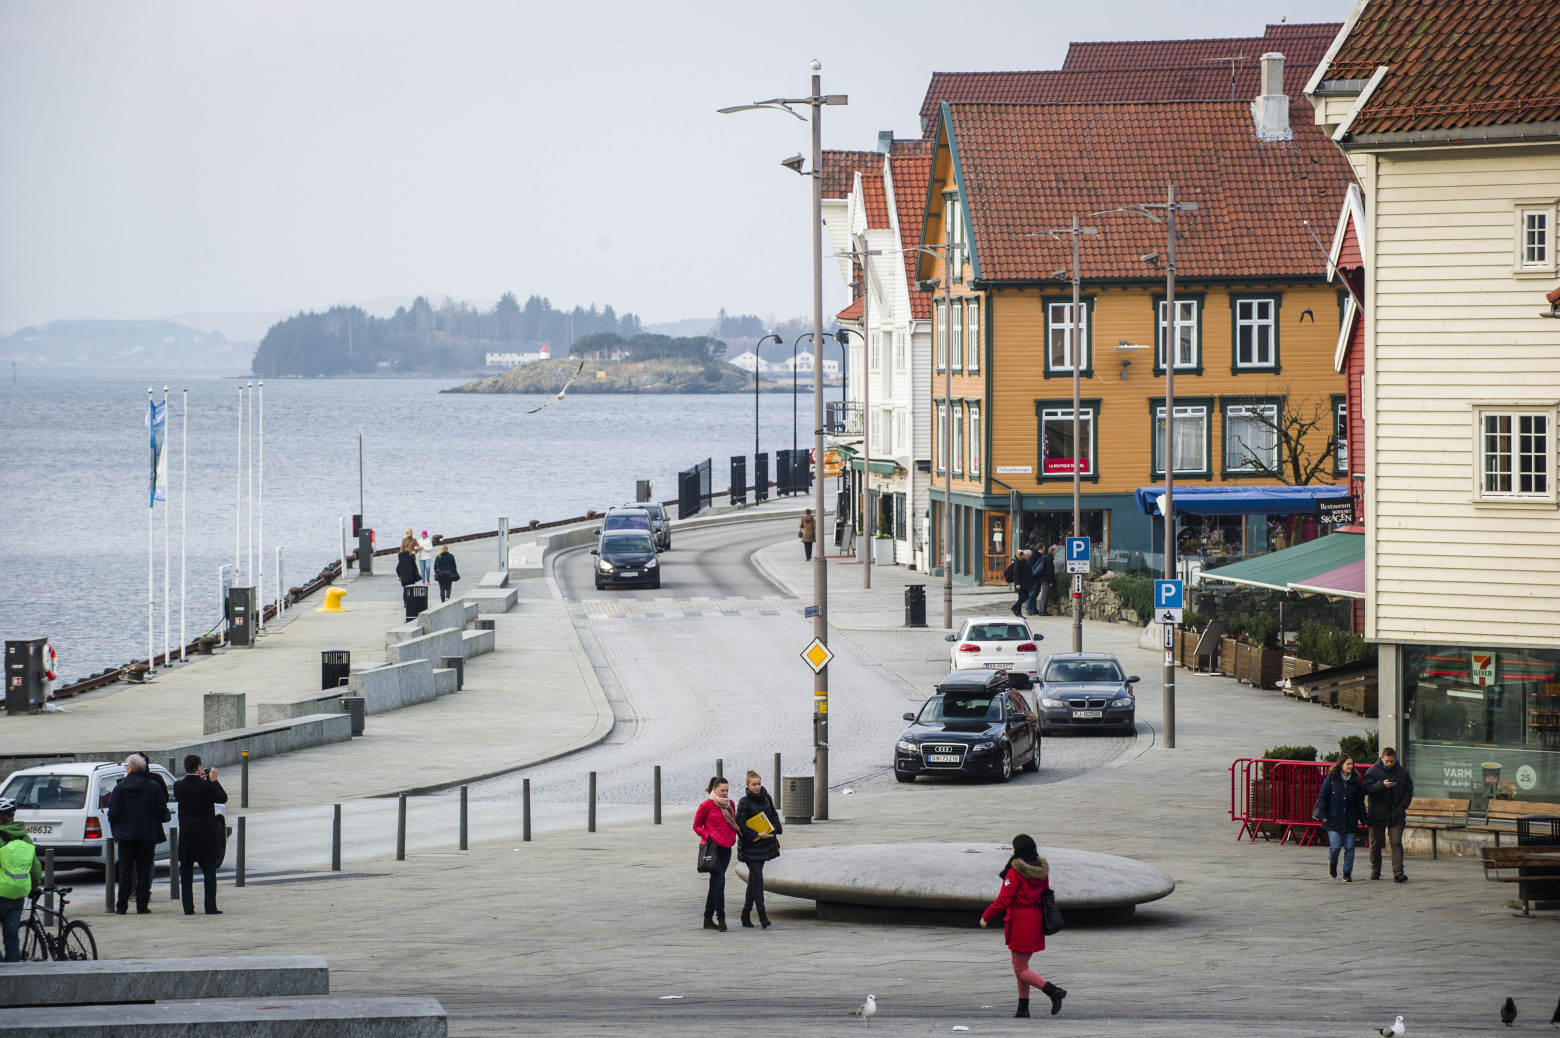 Pedestrians walk along the waterside past old buildings near the dock and port area in Stavanger.